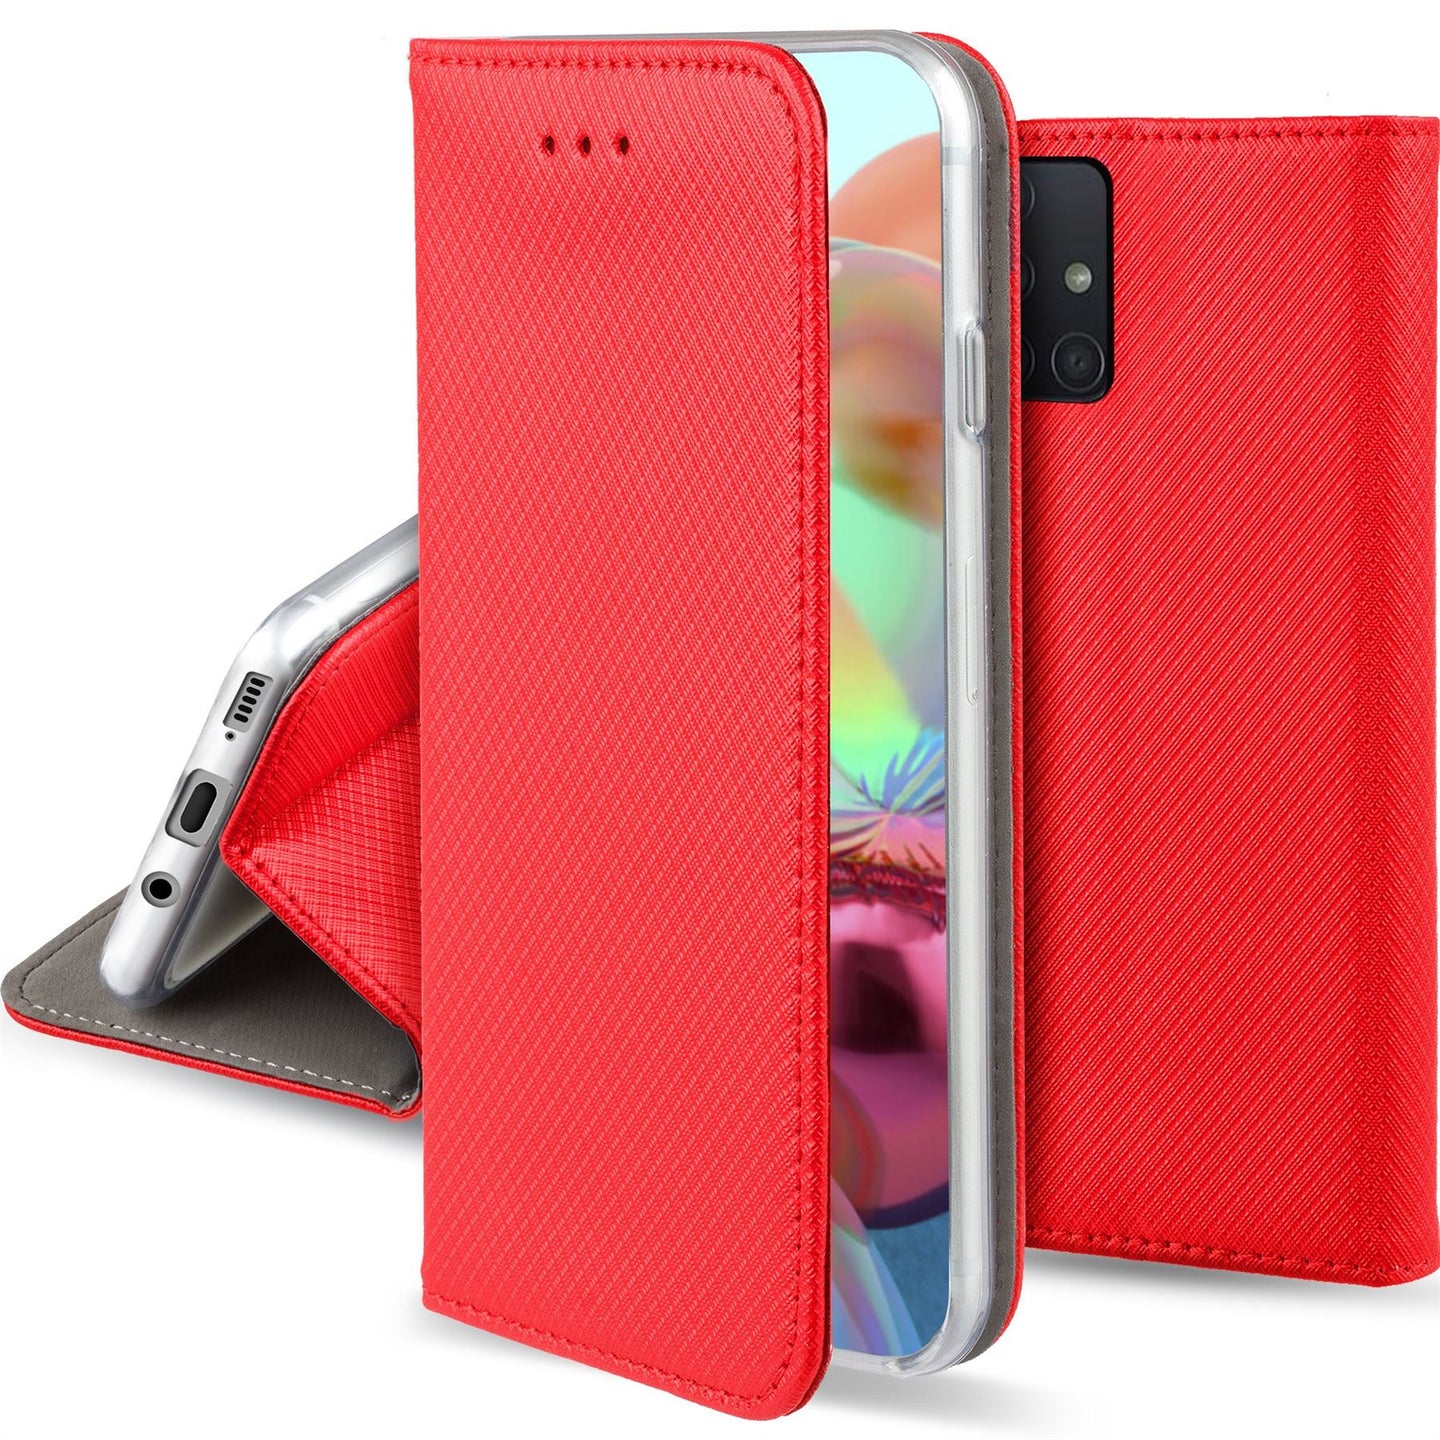 Moozy Case Flip Cover for Samsung A71, Red - Smart Magnetic Flip Case with Card Holder and Stand